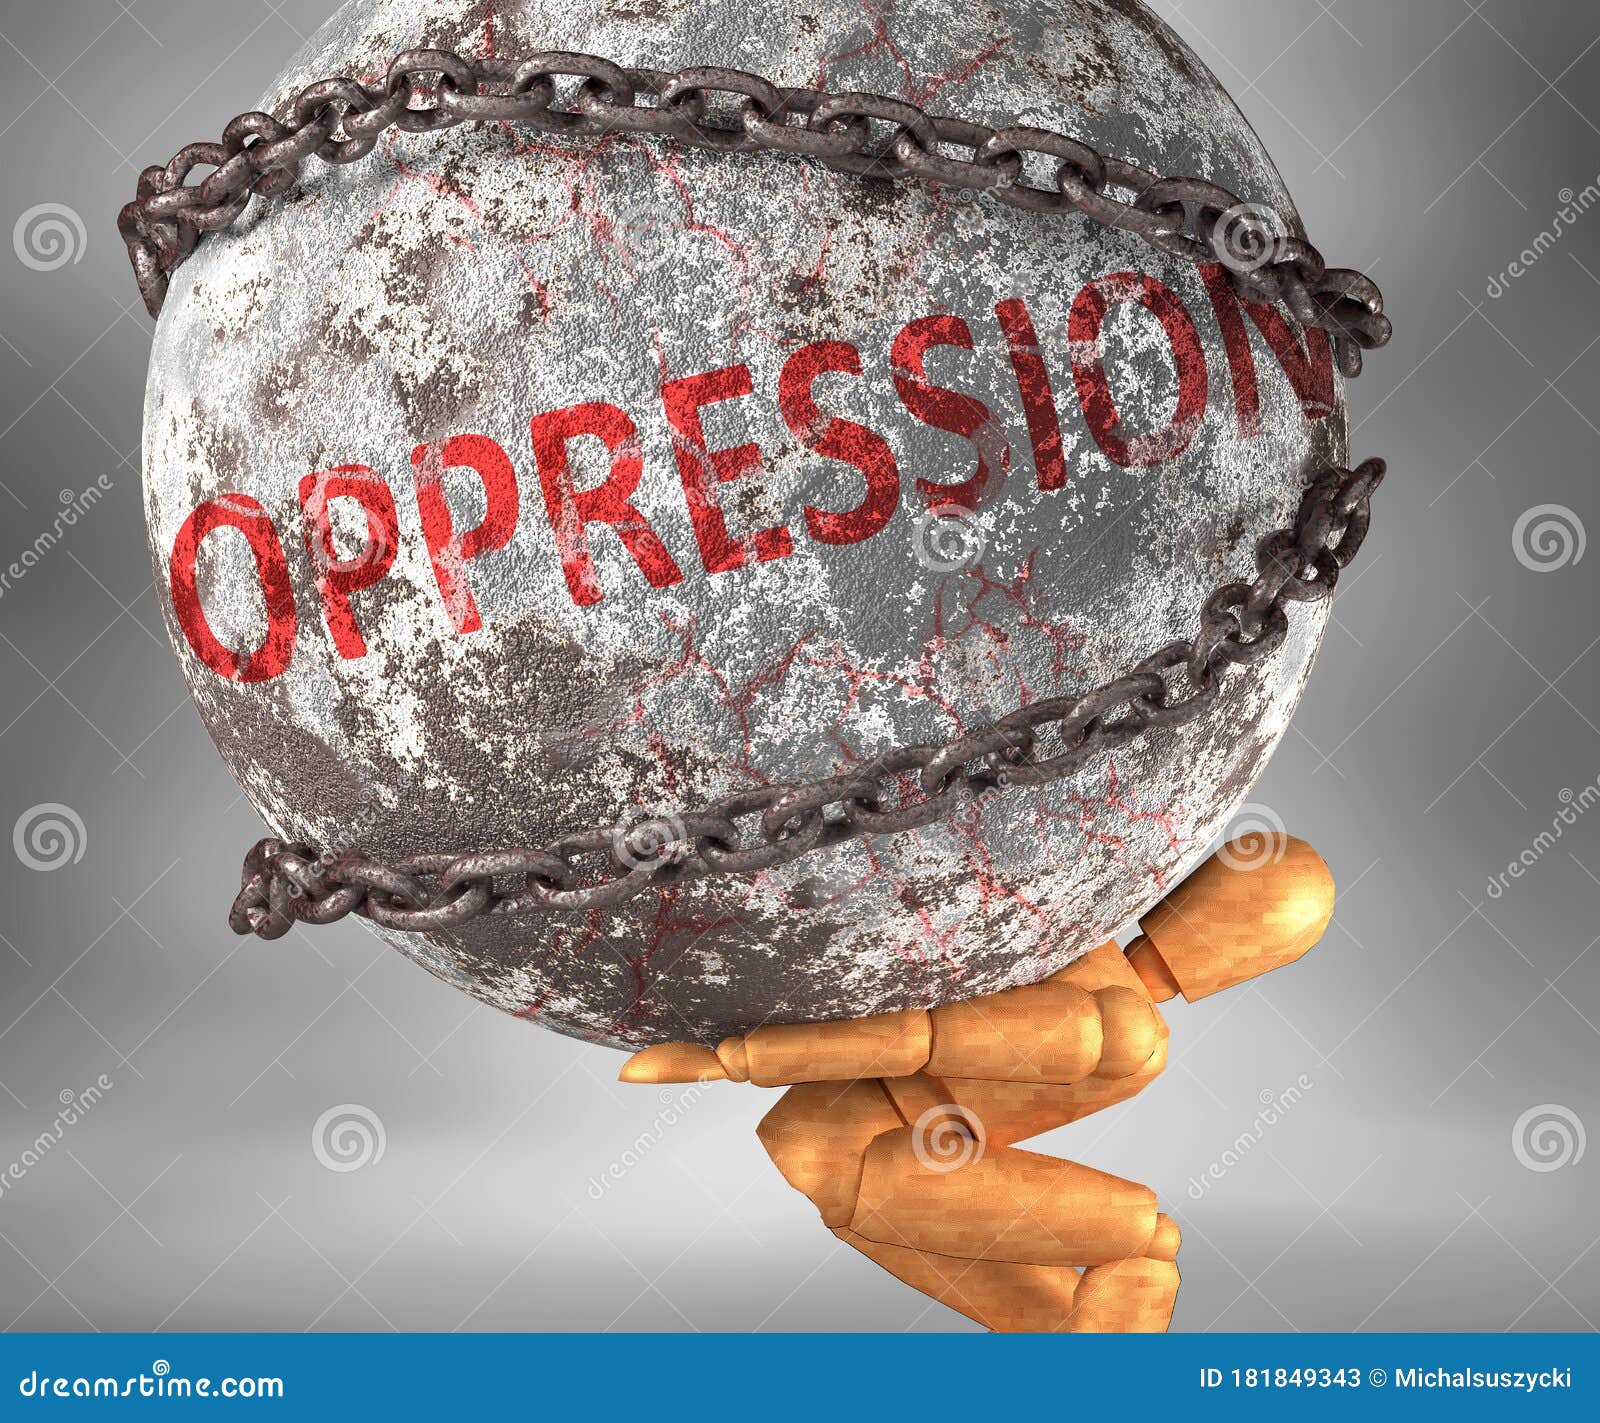 oppression and hardship in life - pictured by word oppression as a heavy weight on shoulders to ize oppression as a burden,